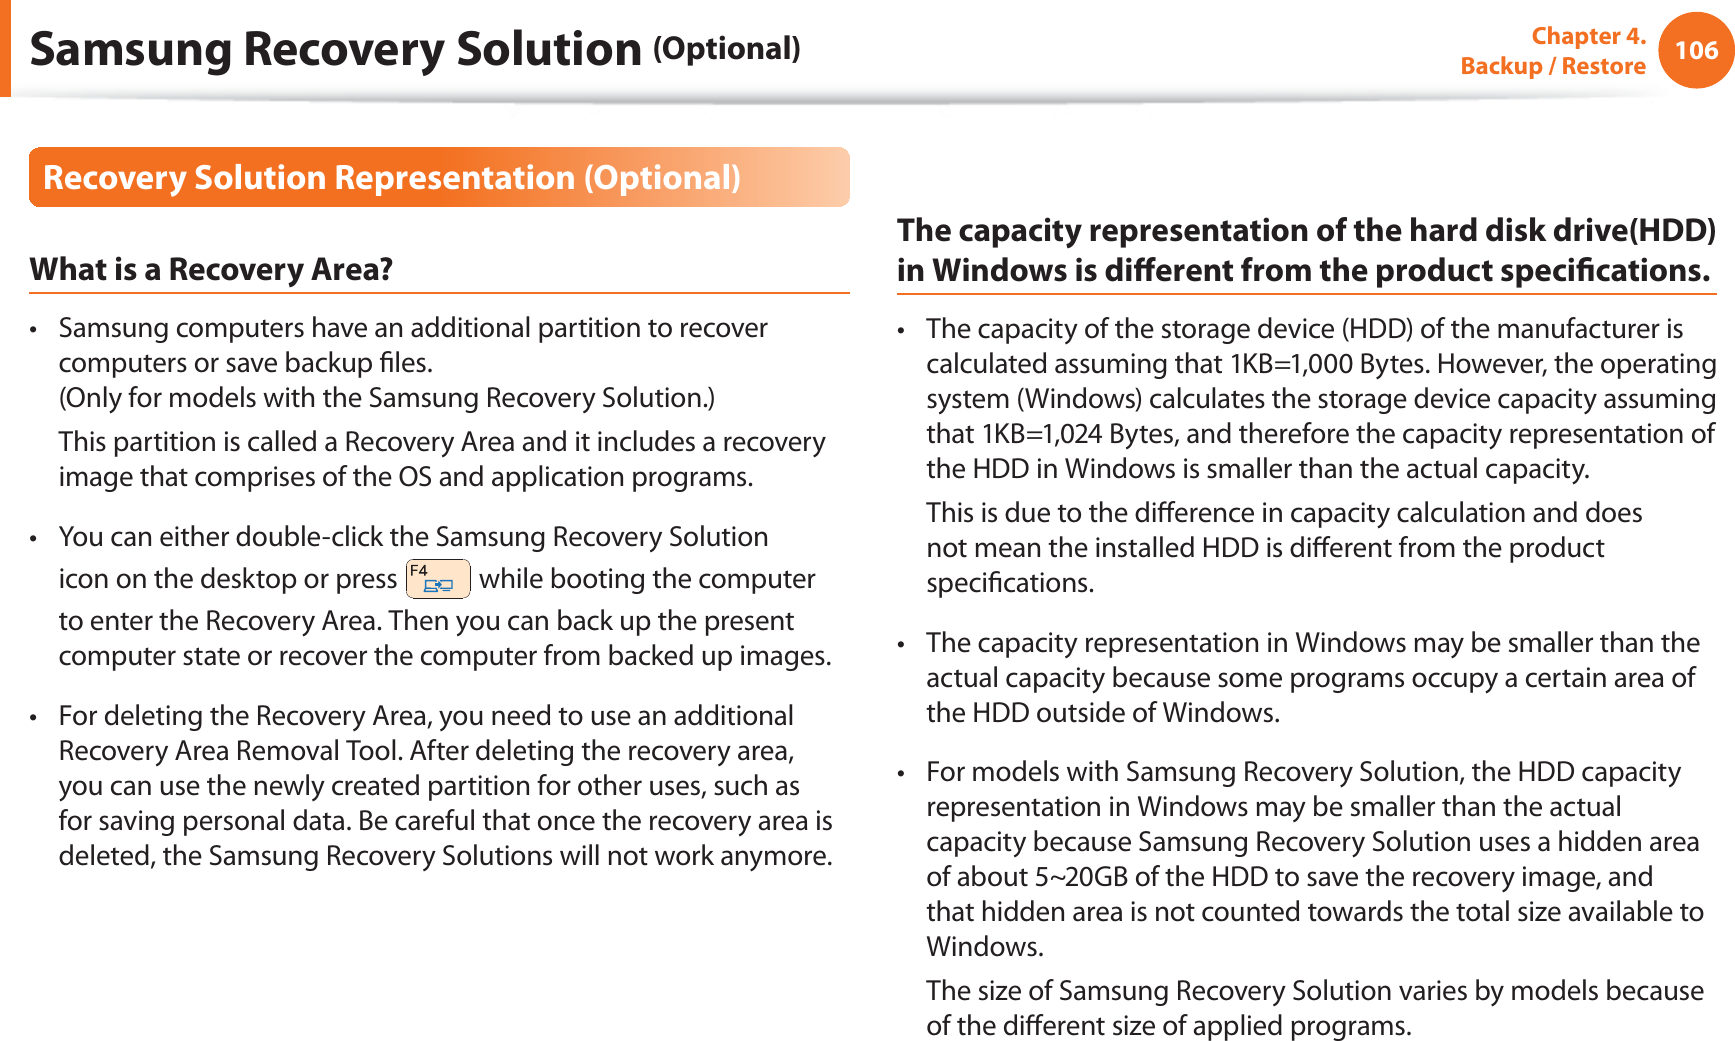 106Chapter  4.   Backup / RestoreRecovery Solution Representation (Optional)What is a Recovery Area?Samsung computers have an additional partition to recover t computers or save backup les. (Only for models with the Samsung Recovery Solution.)  This partition is called a Recovery Area and it includes a recovery image that comprises of the OS and application programs.You can either double-click the Samsung Recovery Solution t icon on the desktop or press   while booting the computer to enter the Recovery Area. Then you can back up the present computer state or recover the computer from backed up images.For deleting the Recovery Area, you need to use an additional t Recovery Area Removal Tool. After deleting the recovery area, you can use the newly created partition for other uses, such as for saving personal data. Be careful that once the recovery area is deleted, the Samsung Recovery Solutions will not work anymore.The capacity representation of the hard disk drive(HDD) in Windows is dierent from the product specications.The capacity of the storage device (HDD) of the manufacturer is t calculated assuming that 1KB=1,000 Bytes. However, the operating system (Windows) calculates the storage device capacity assuming that 1KB=1,024 Bytes, and therefore the capacity representation of the HDD in Windows is smaller than the actual capacity.  This is due to the dierence in capacity calculation and does not mean the installed HDD is dierent from the product specications.The capacity representation in Windows may be smaller than the t actual capacity because some programs occupy a certain area of the HDD outside of Windows.For models with Samsung Recovery Solution, the HDD capacity t representation in Windows may be smaller than the actual capacity because Samsung Recovery Solution uses a hidden area of about 5~20GB of the HDD to save the recovery image, and that hidden area is not counted towards the total size available to Windows.  The size of Samsung Recovery Solution varies by models because of the dierent size of applied programs.Samsung Recovery Solution (Optional)